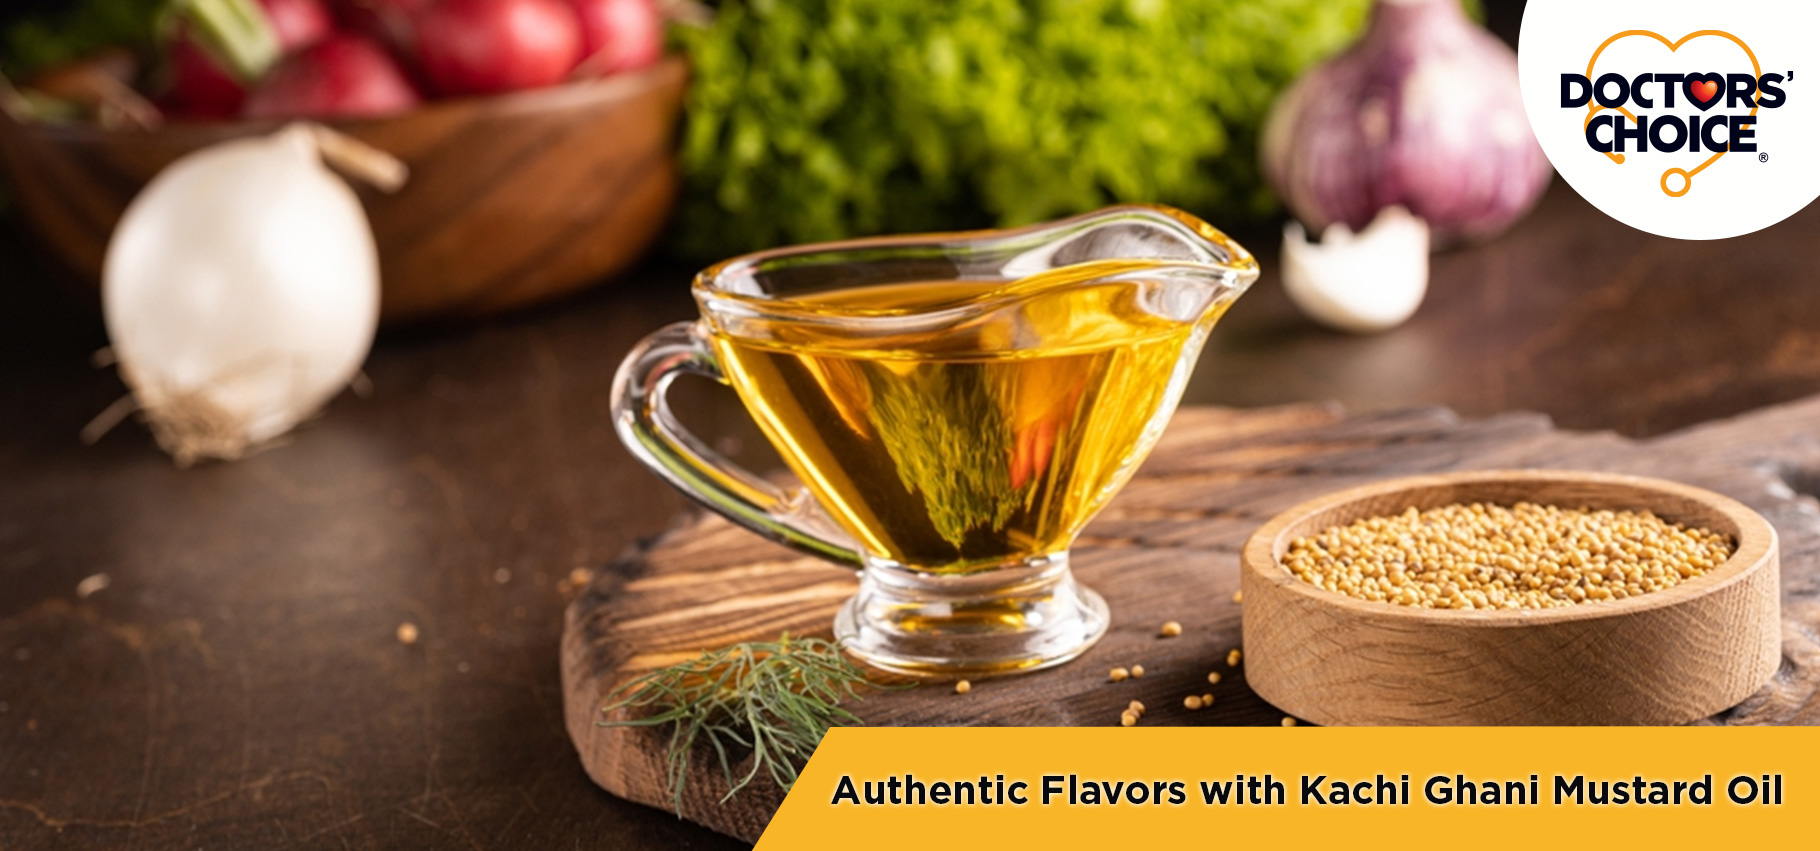 Get Authentic Flavors of Dishes with Kachi Ghani Mustard Oil